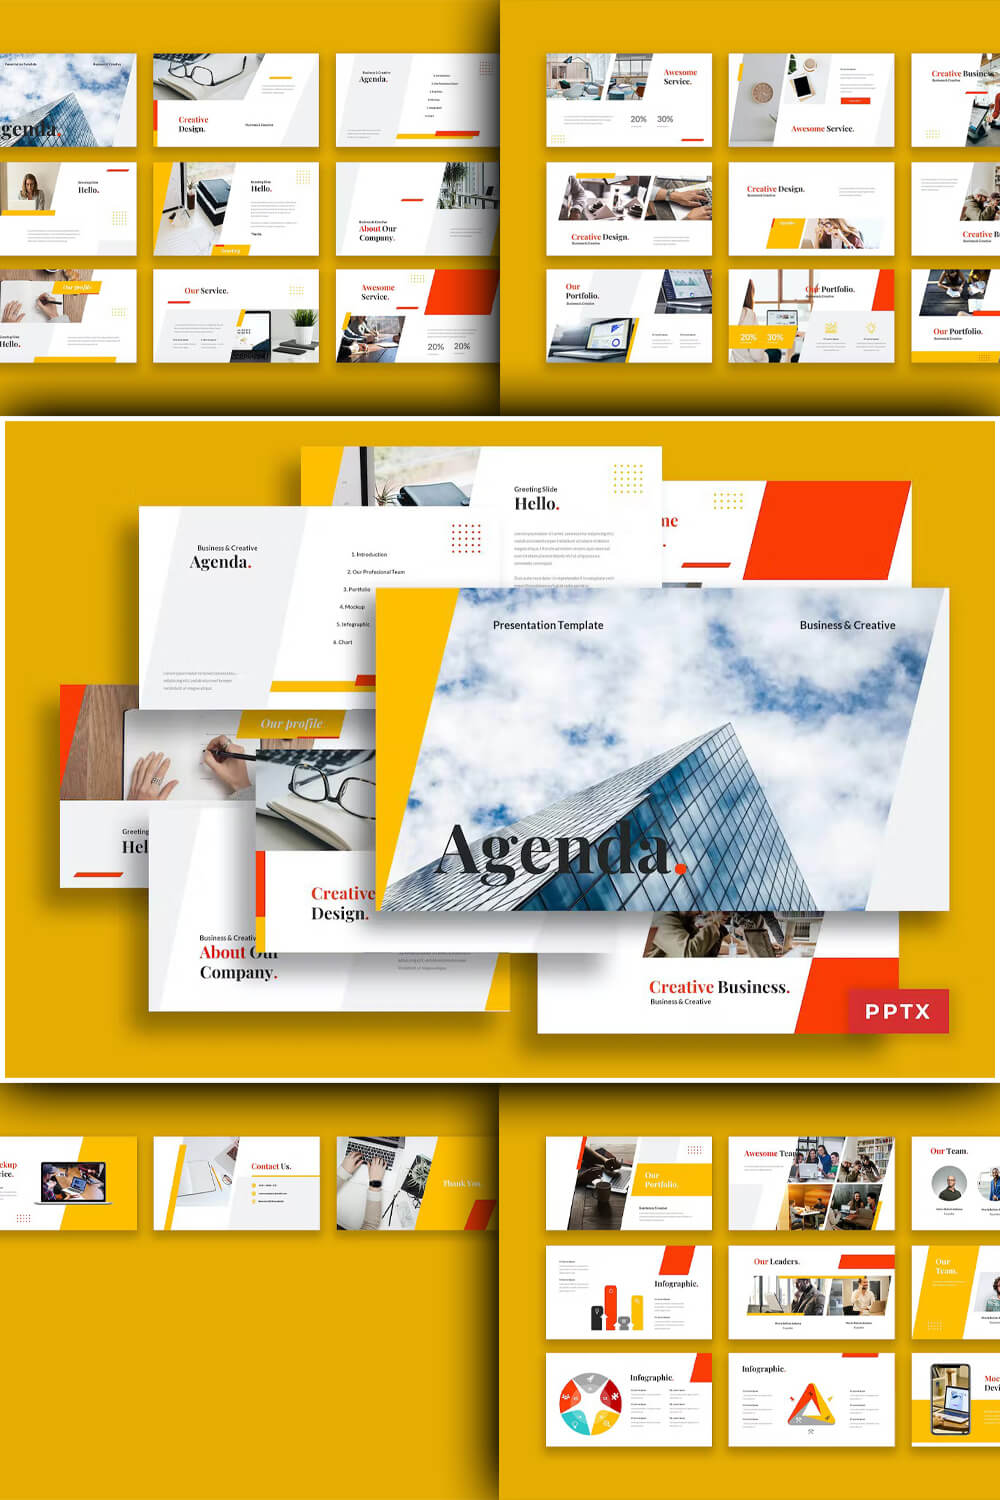 Introduction of Agenda - Business Powerpoint Presentation.